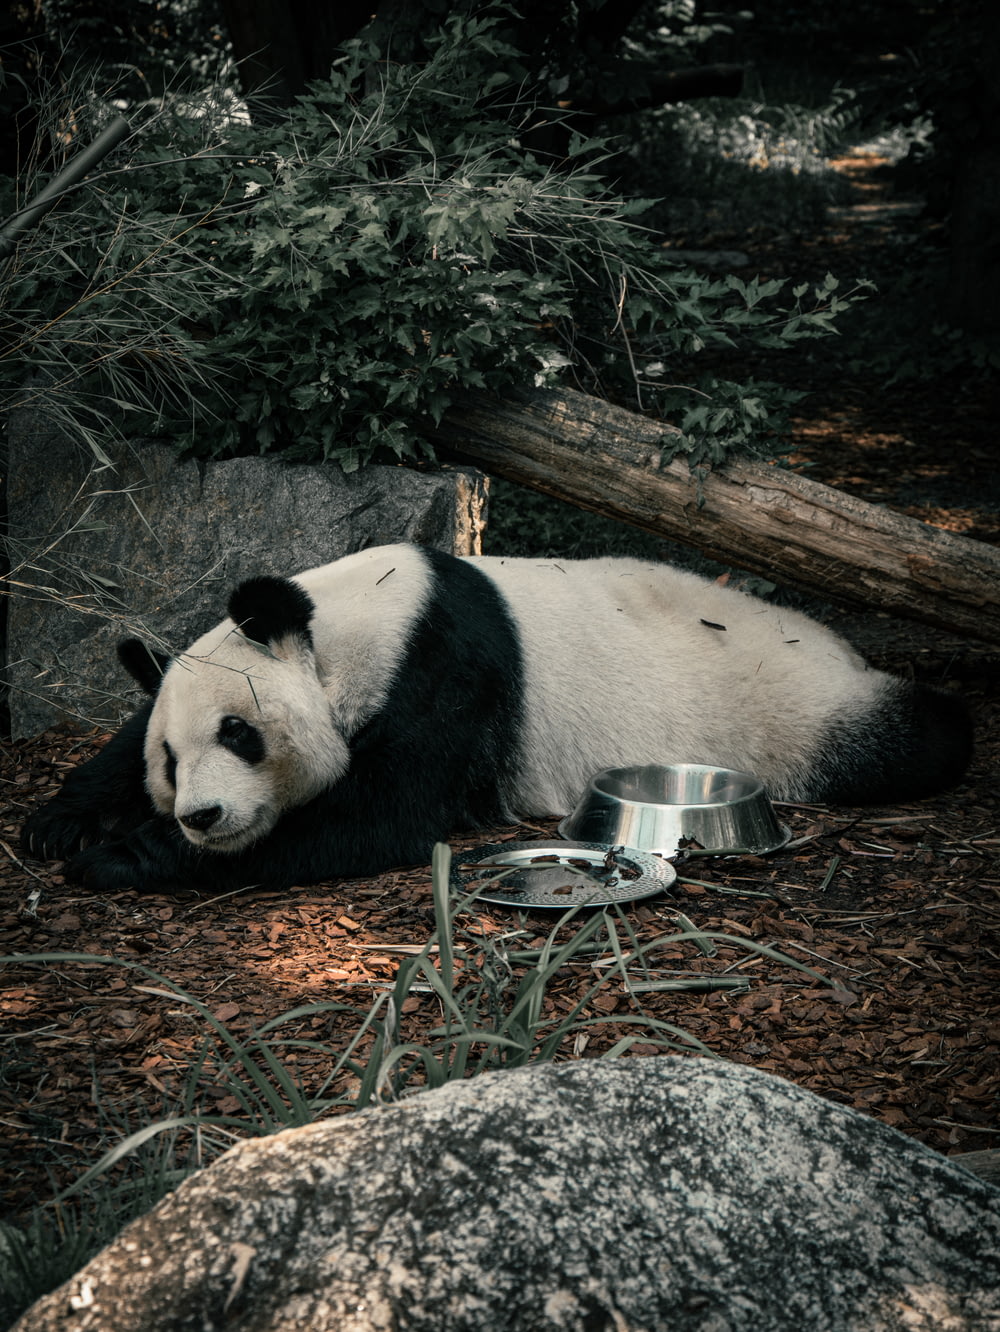 a panda eating from a bowl